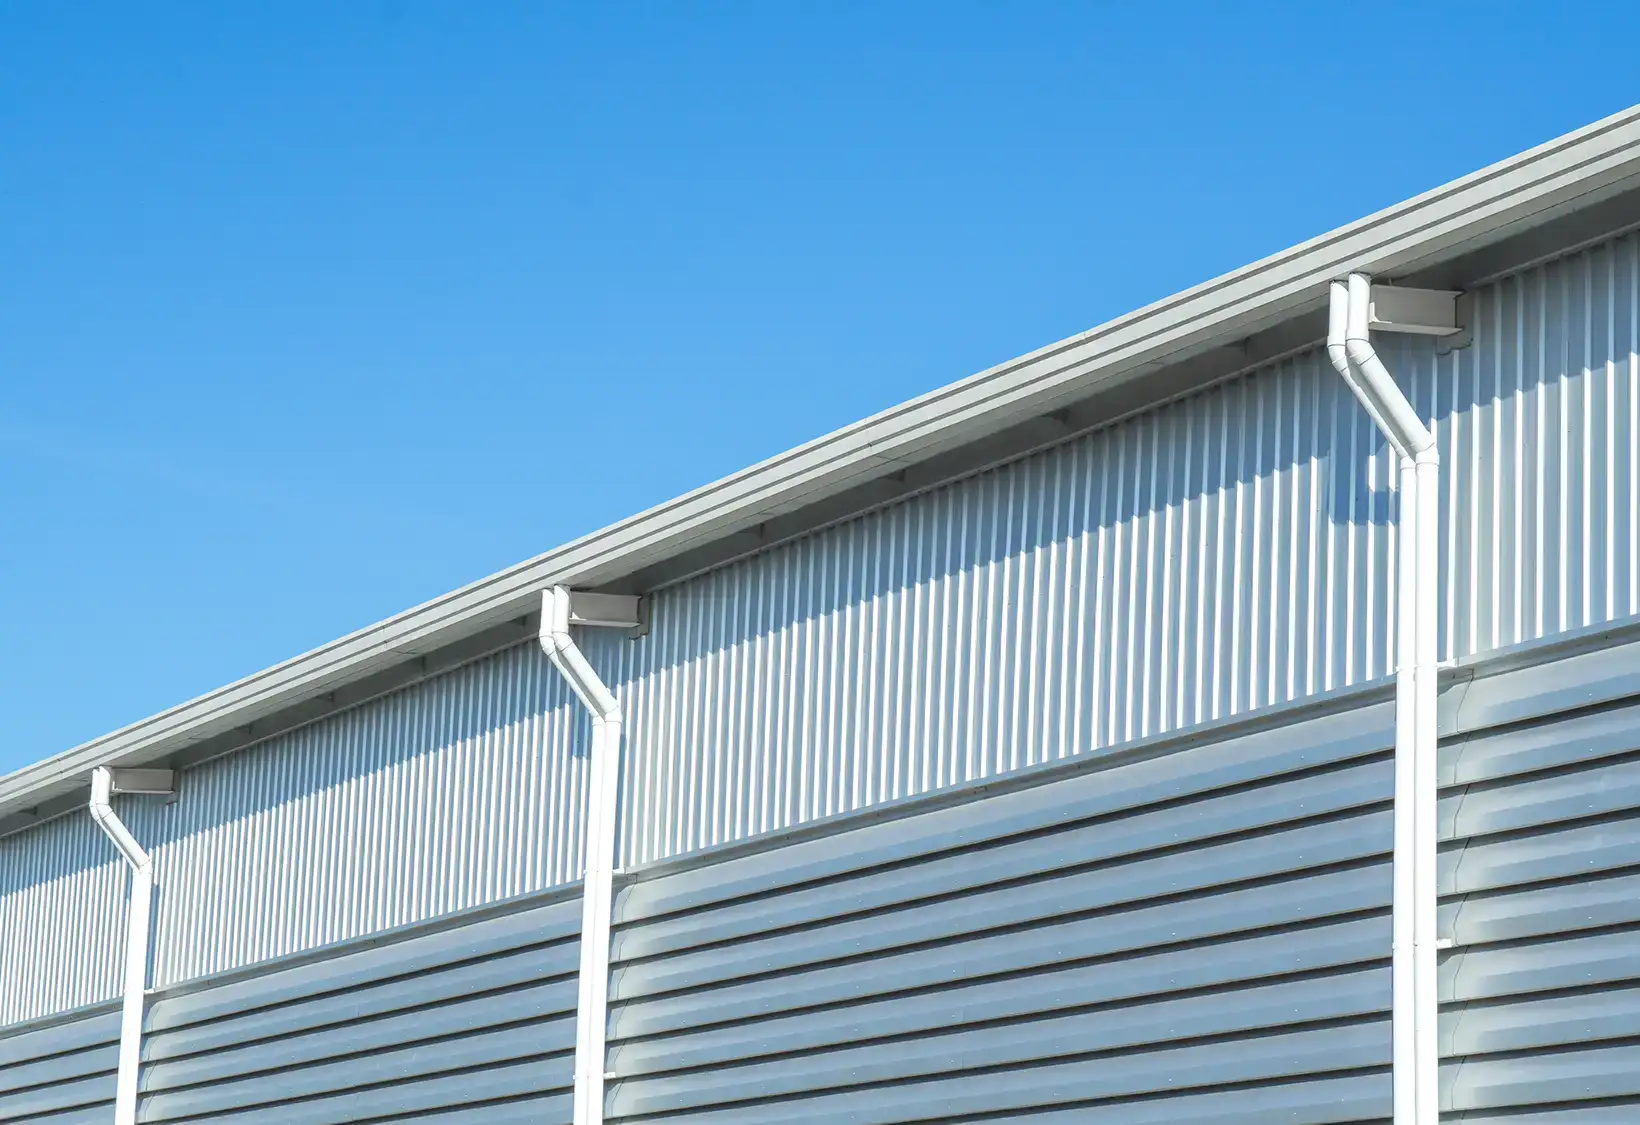 Commercial gutter system for large warehouse - Bond County, IL